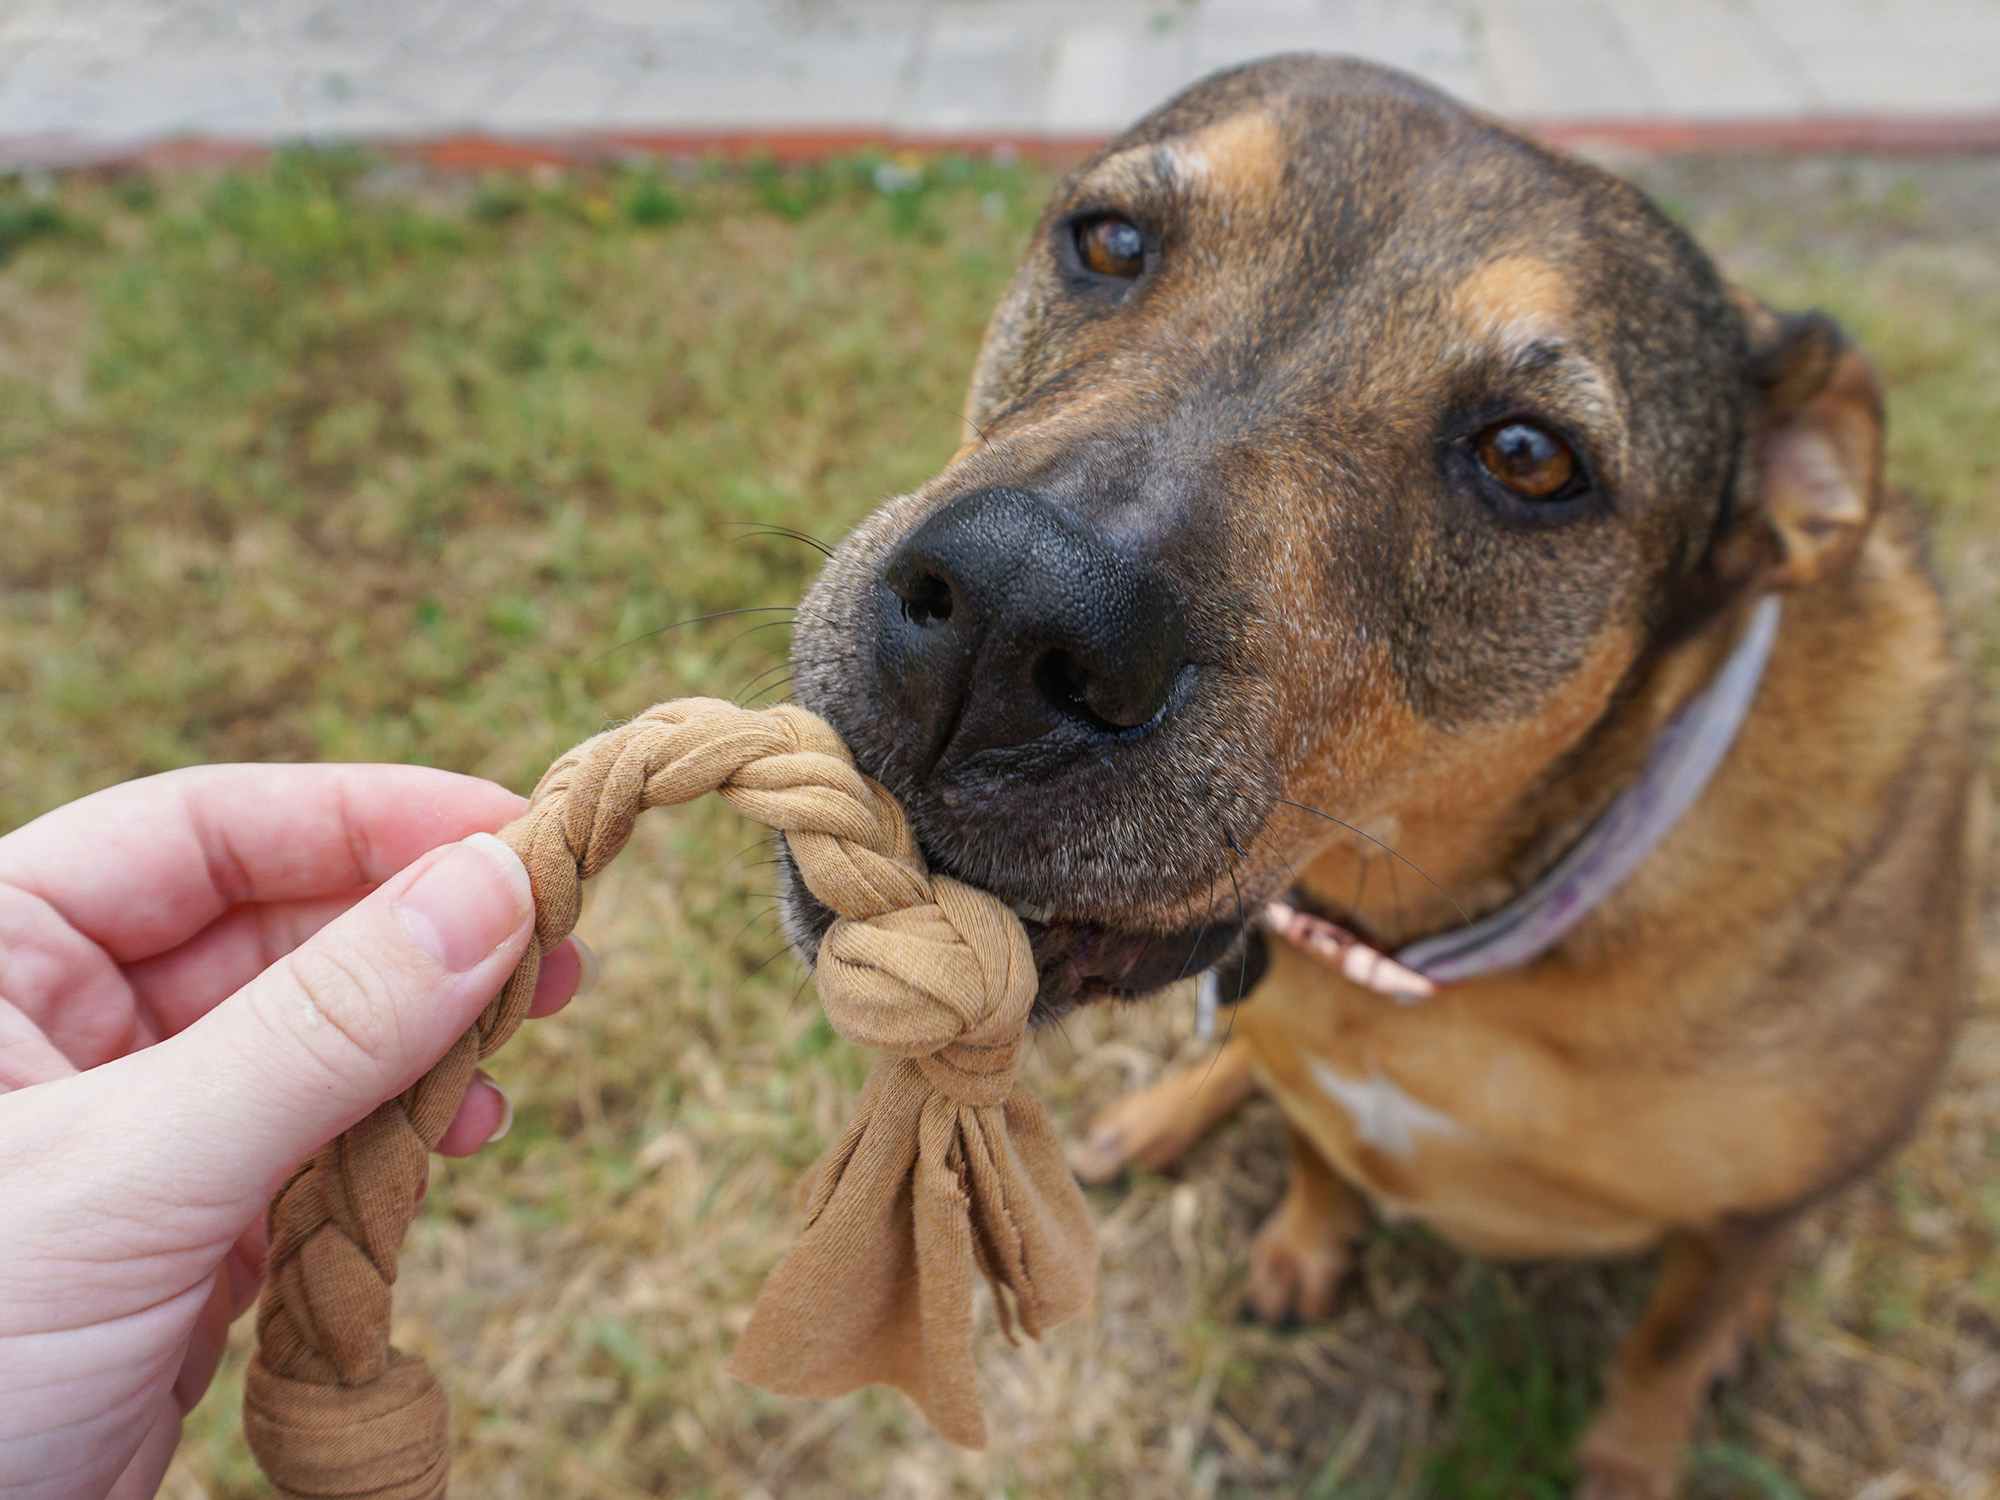 A dog going to take a rope toy from her owner's hand